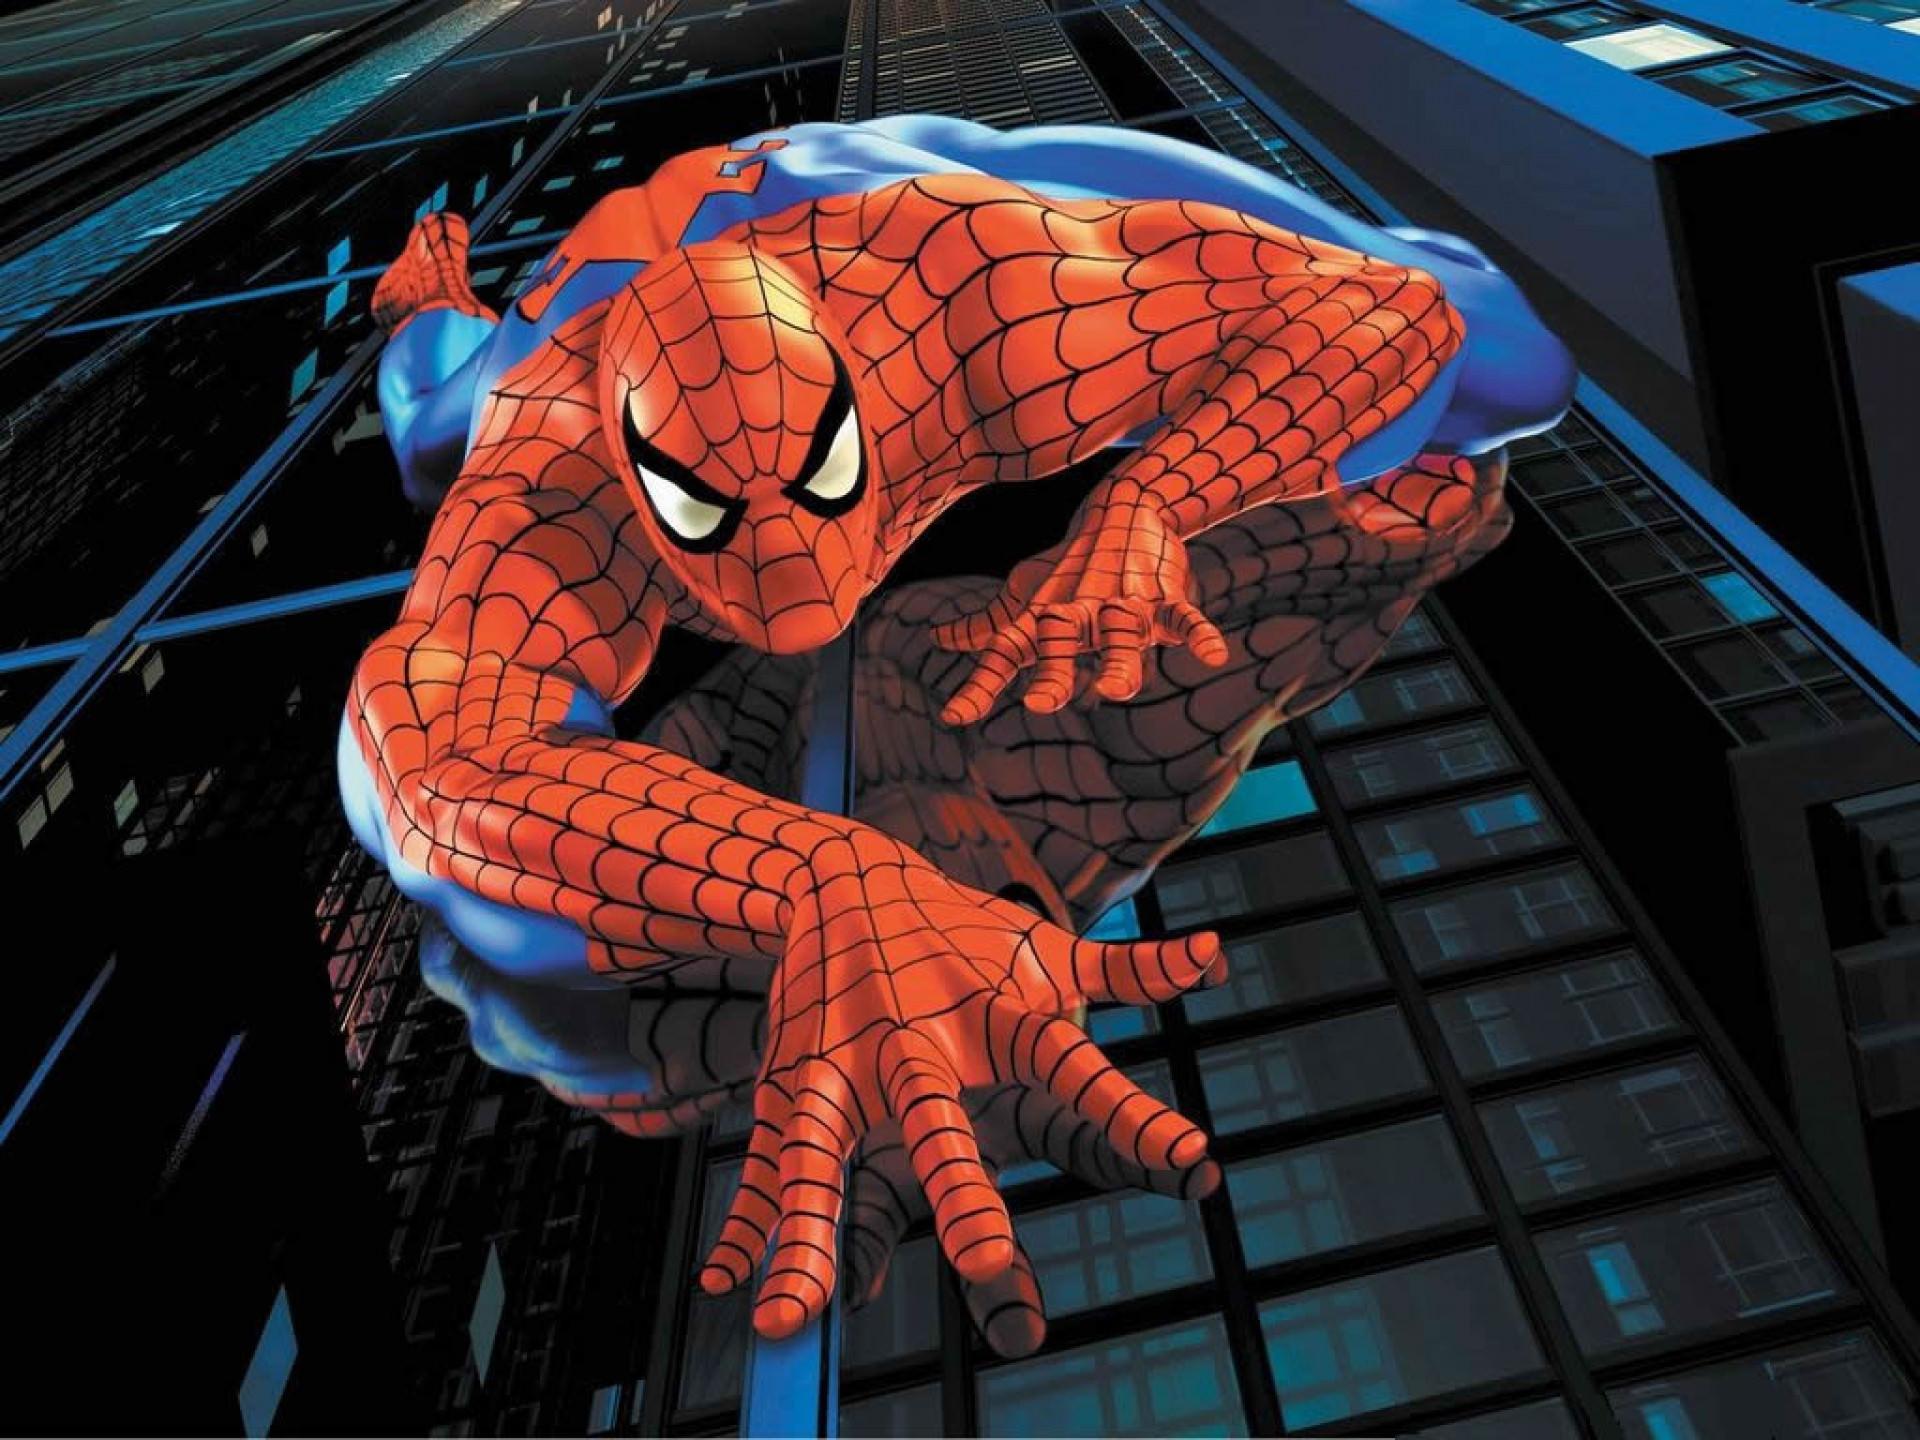 Spiderman Cartoon Creep on The Wall of The Building Wallpaper HD